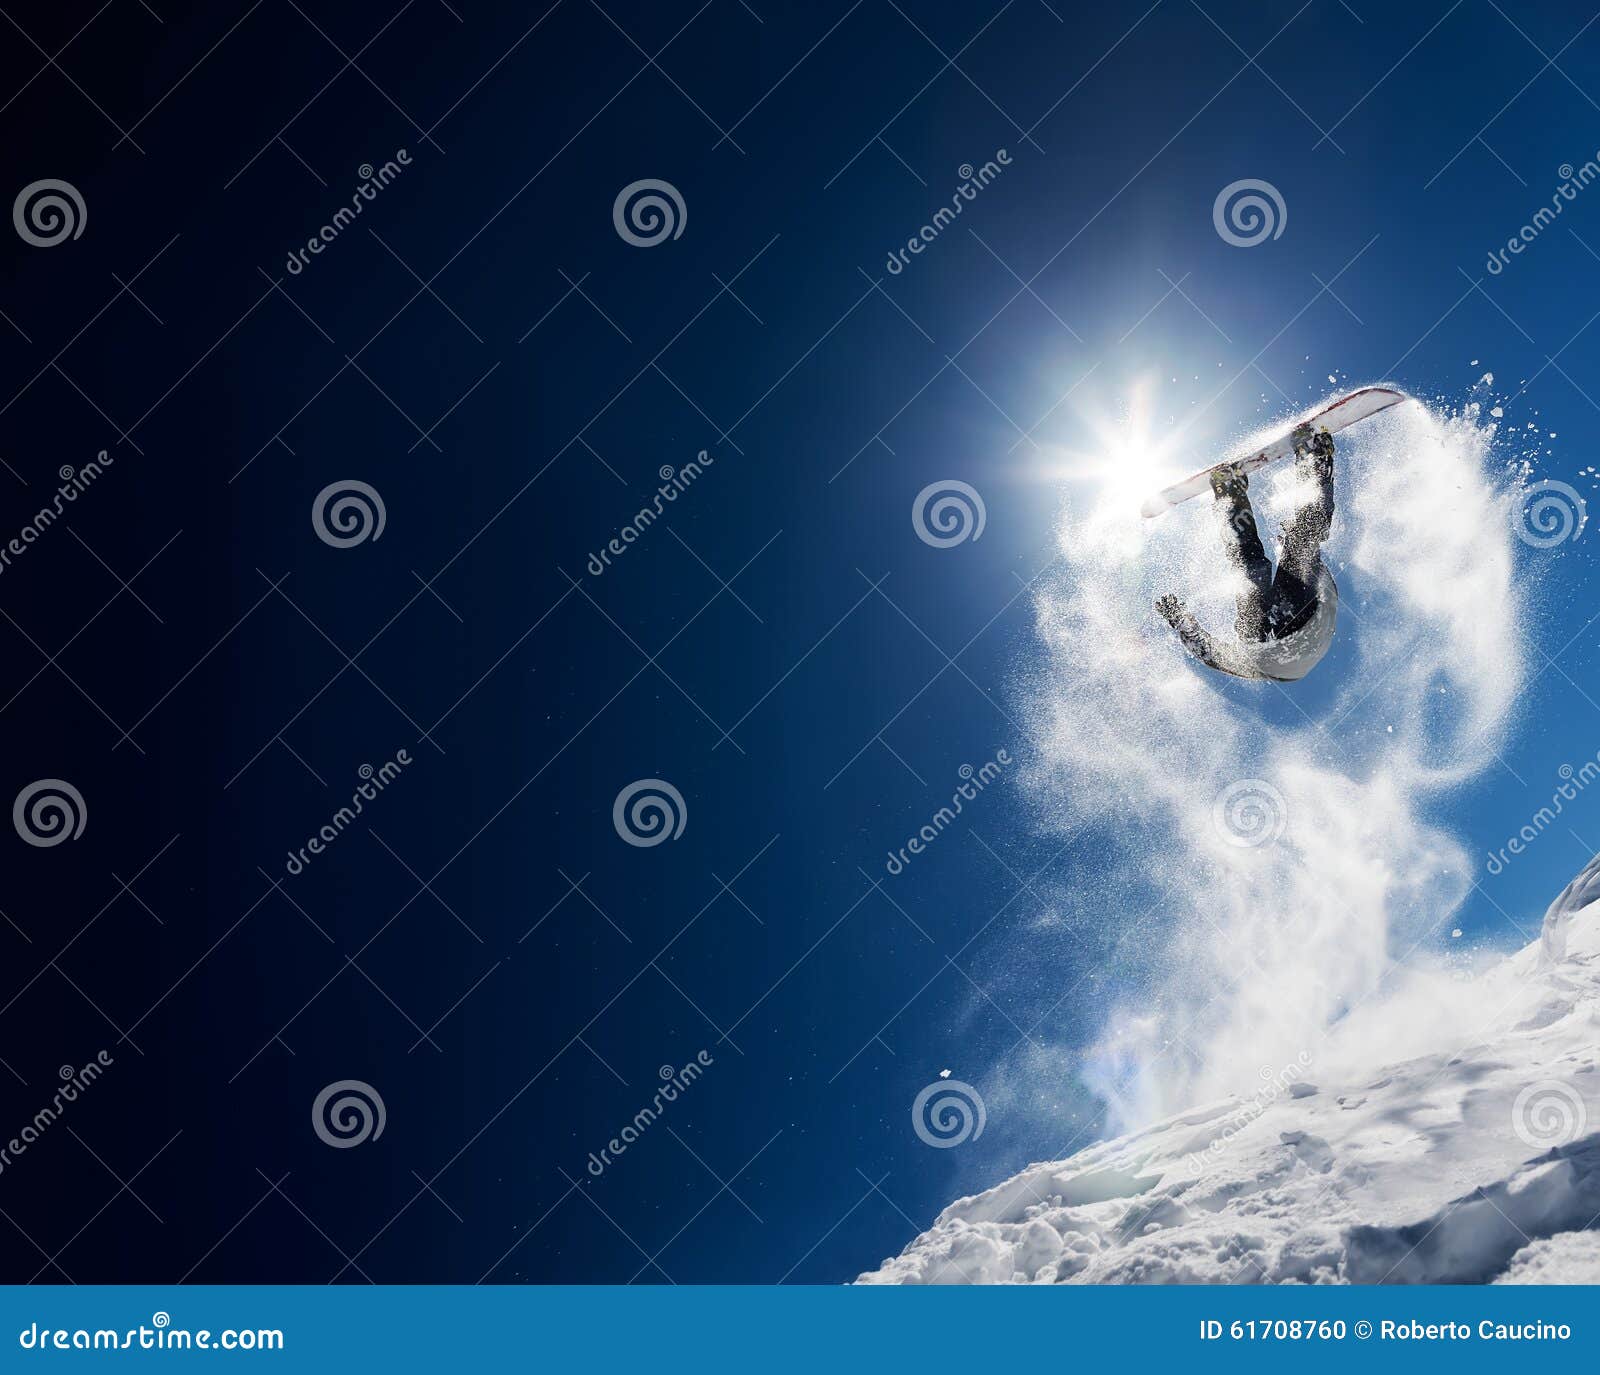 snowboarder making high jump in clear blue sky